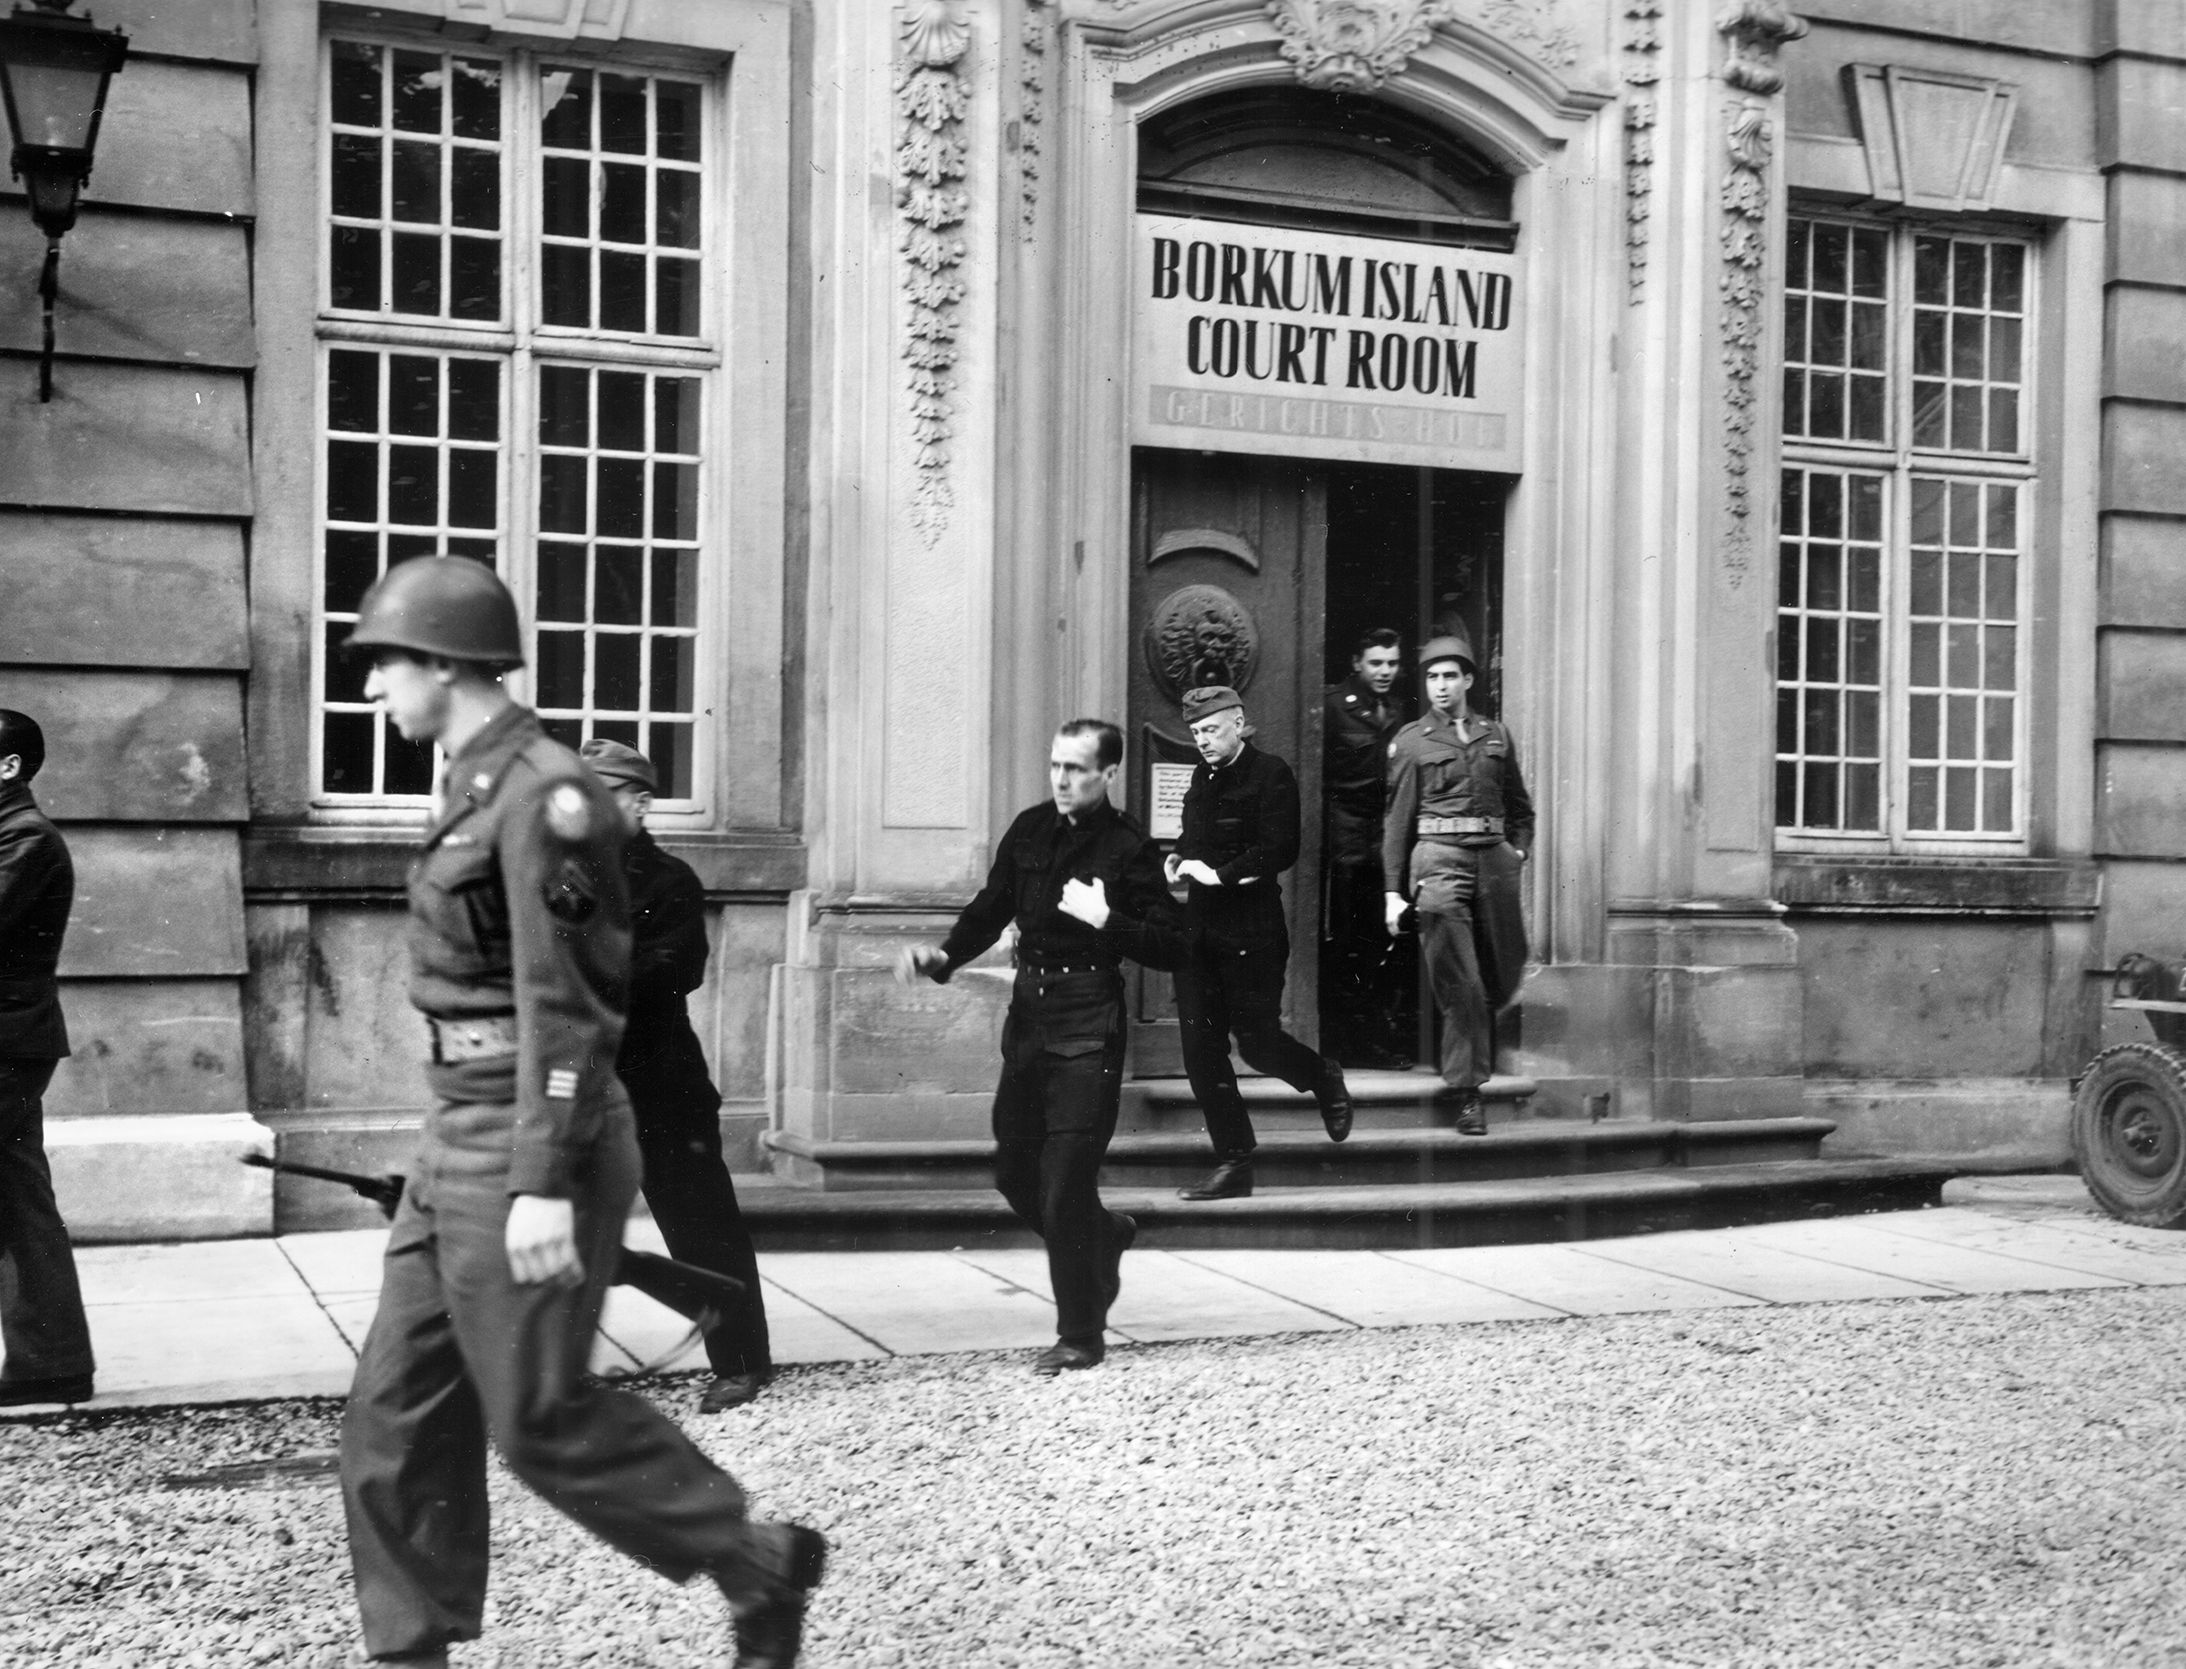 In February 1946, defendants leave the court room during the war crimes trial held at Borkum Island. The accused were convicted and some had their sentences reduced. 